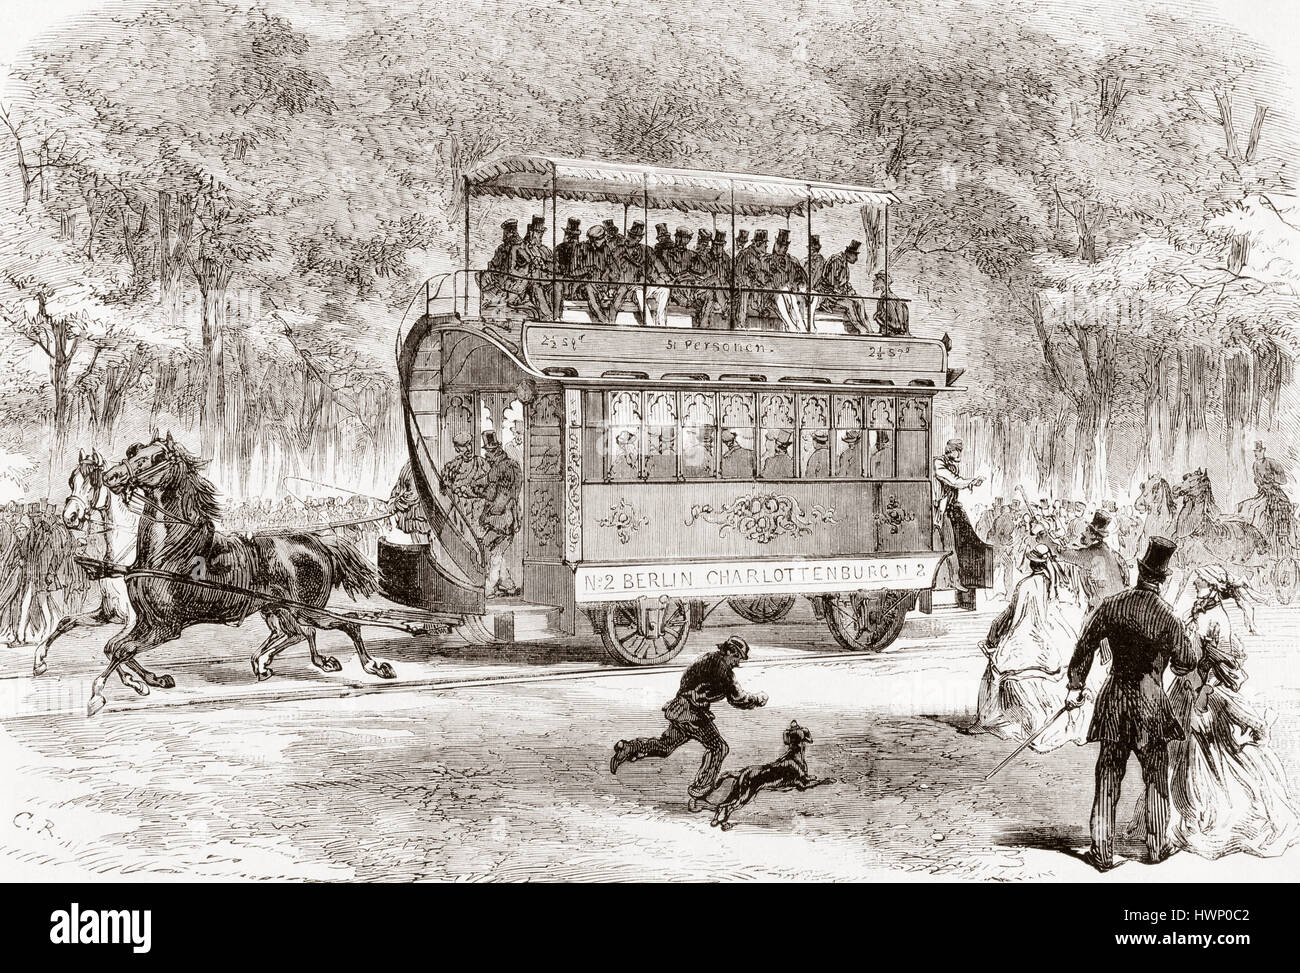 The first horse-bus or horse-drawn omnibus line from Brandenburger Tor, Berlin, Germany to Charlottenburg in 1825.  From L'Univers Illustre published 1867. Stock Photo